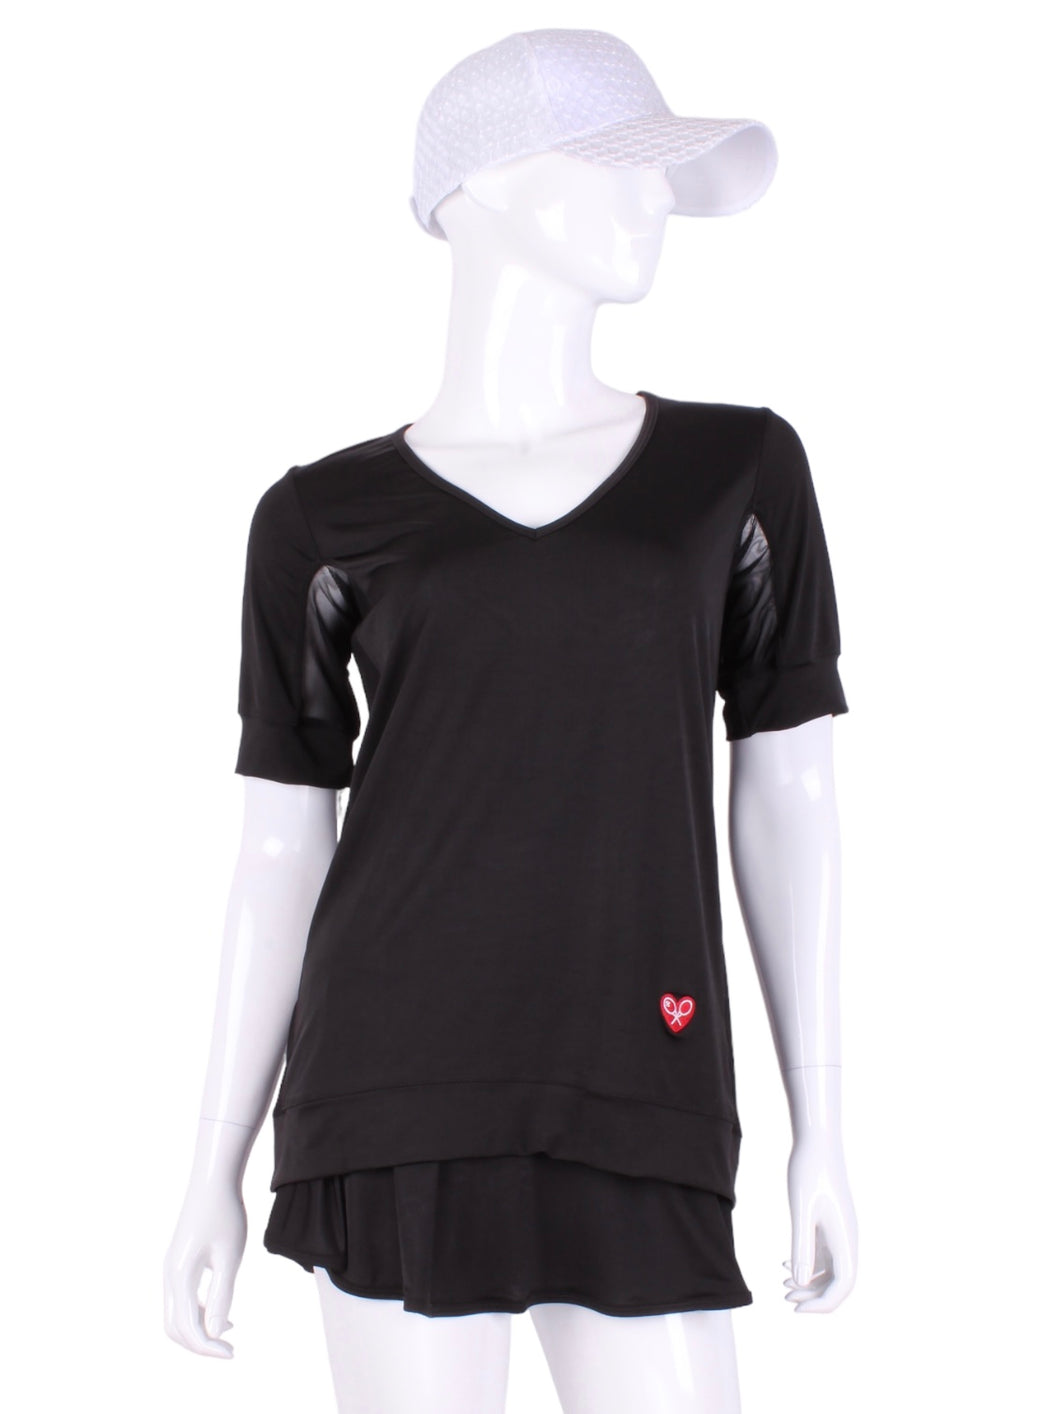 Baggy Soft Black Vee Tee. The very comfortable Baggy Vee Tee is so cool and easy to wear.  The sides are cool airy mesh to allow for 